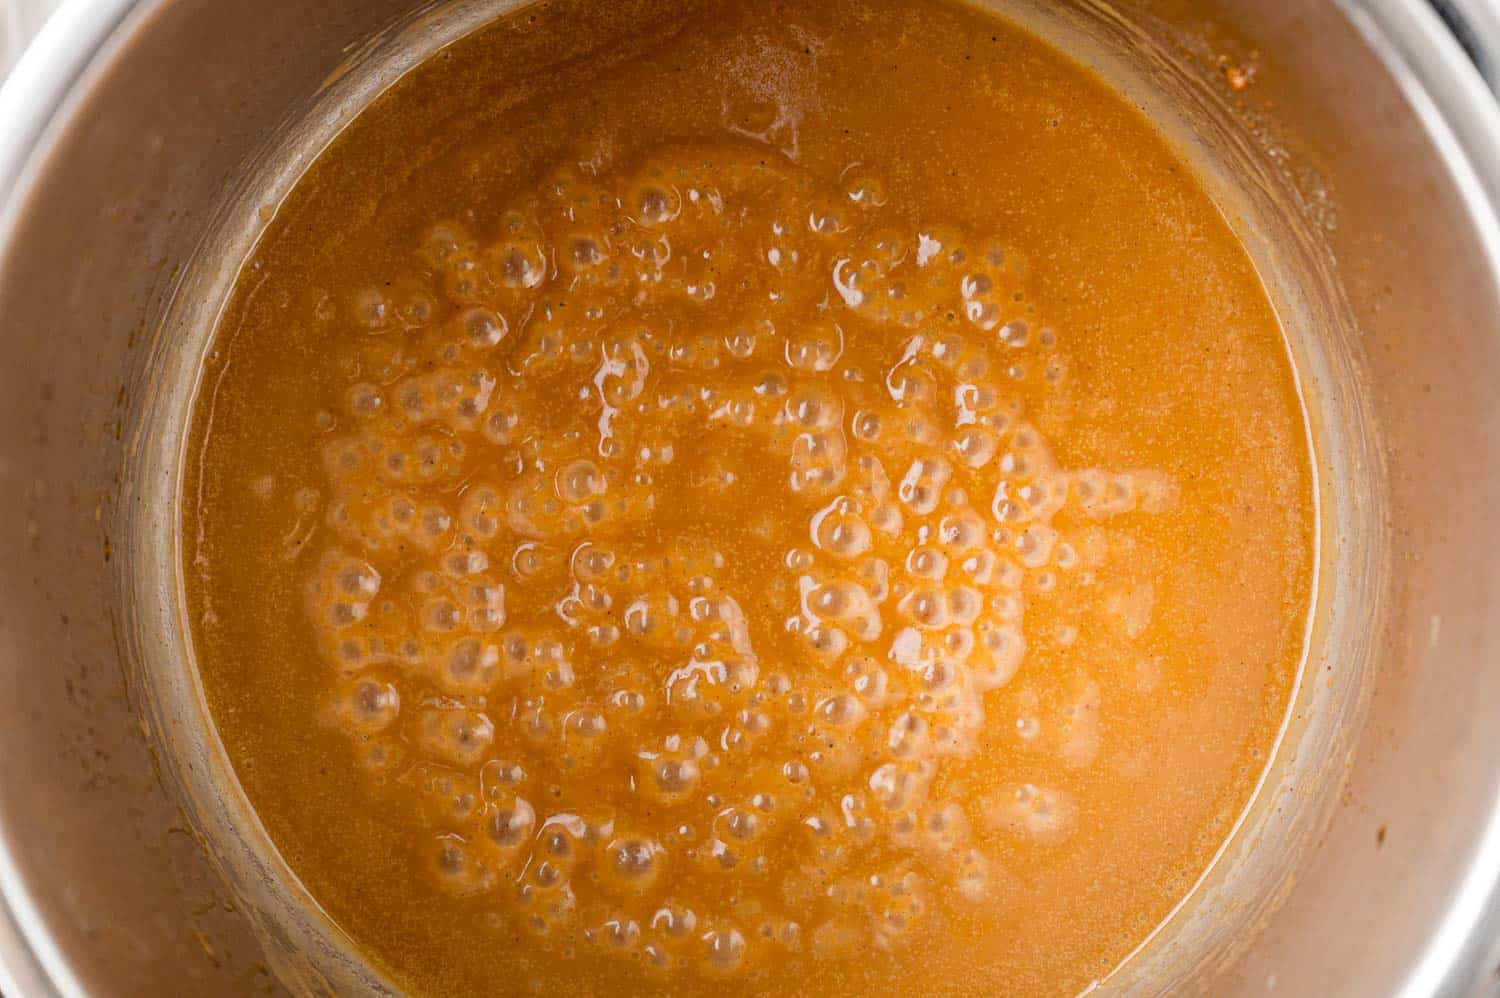 Chicken gravy in the Instant Pot, light brown in color.